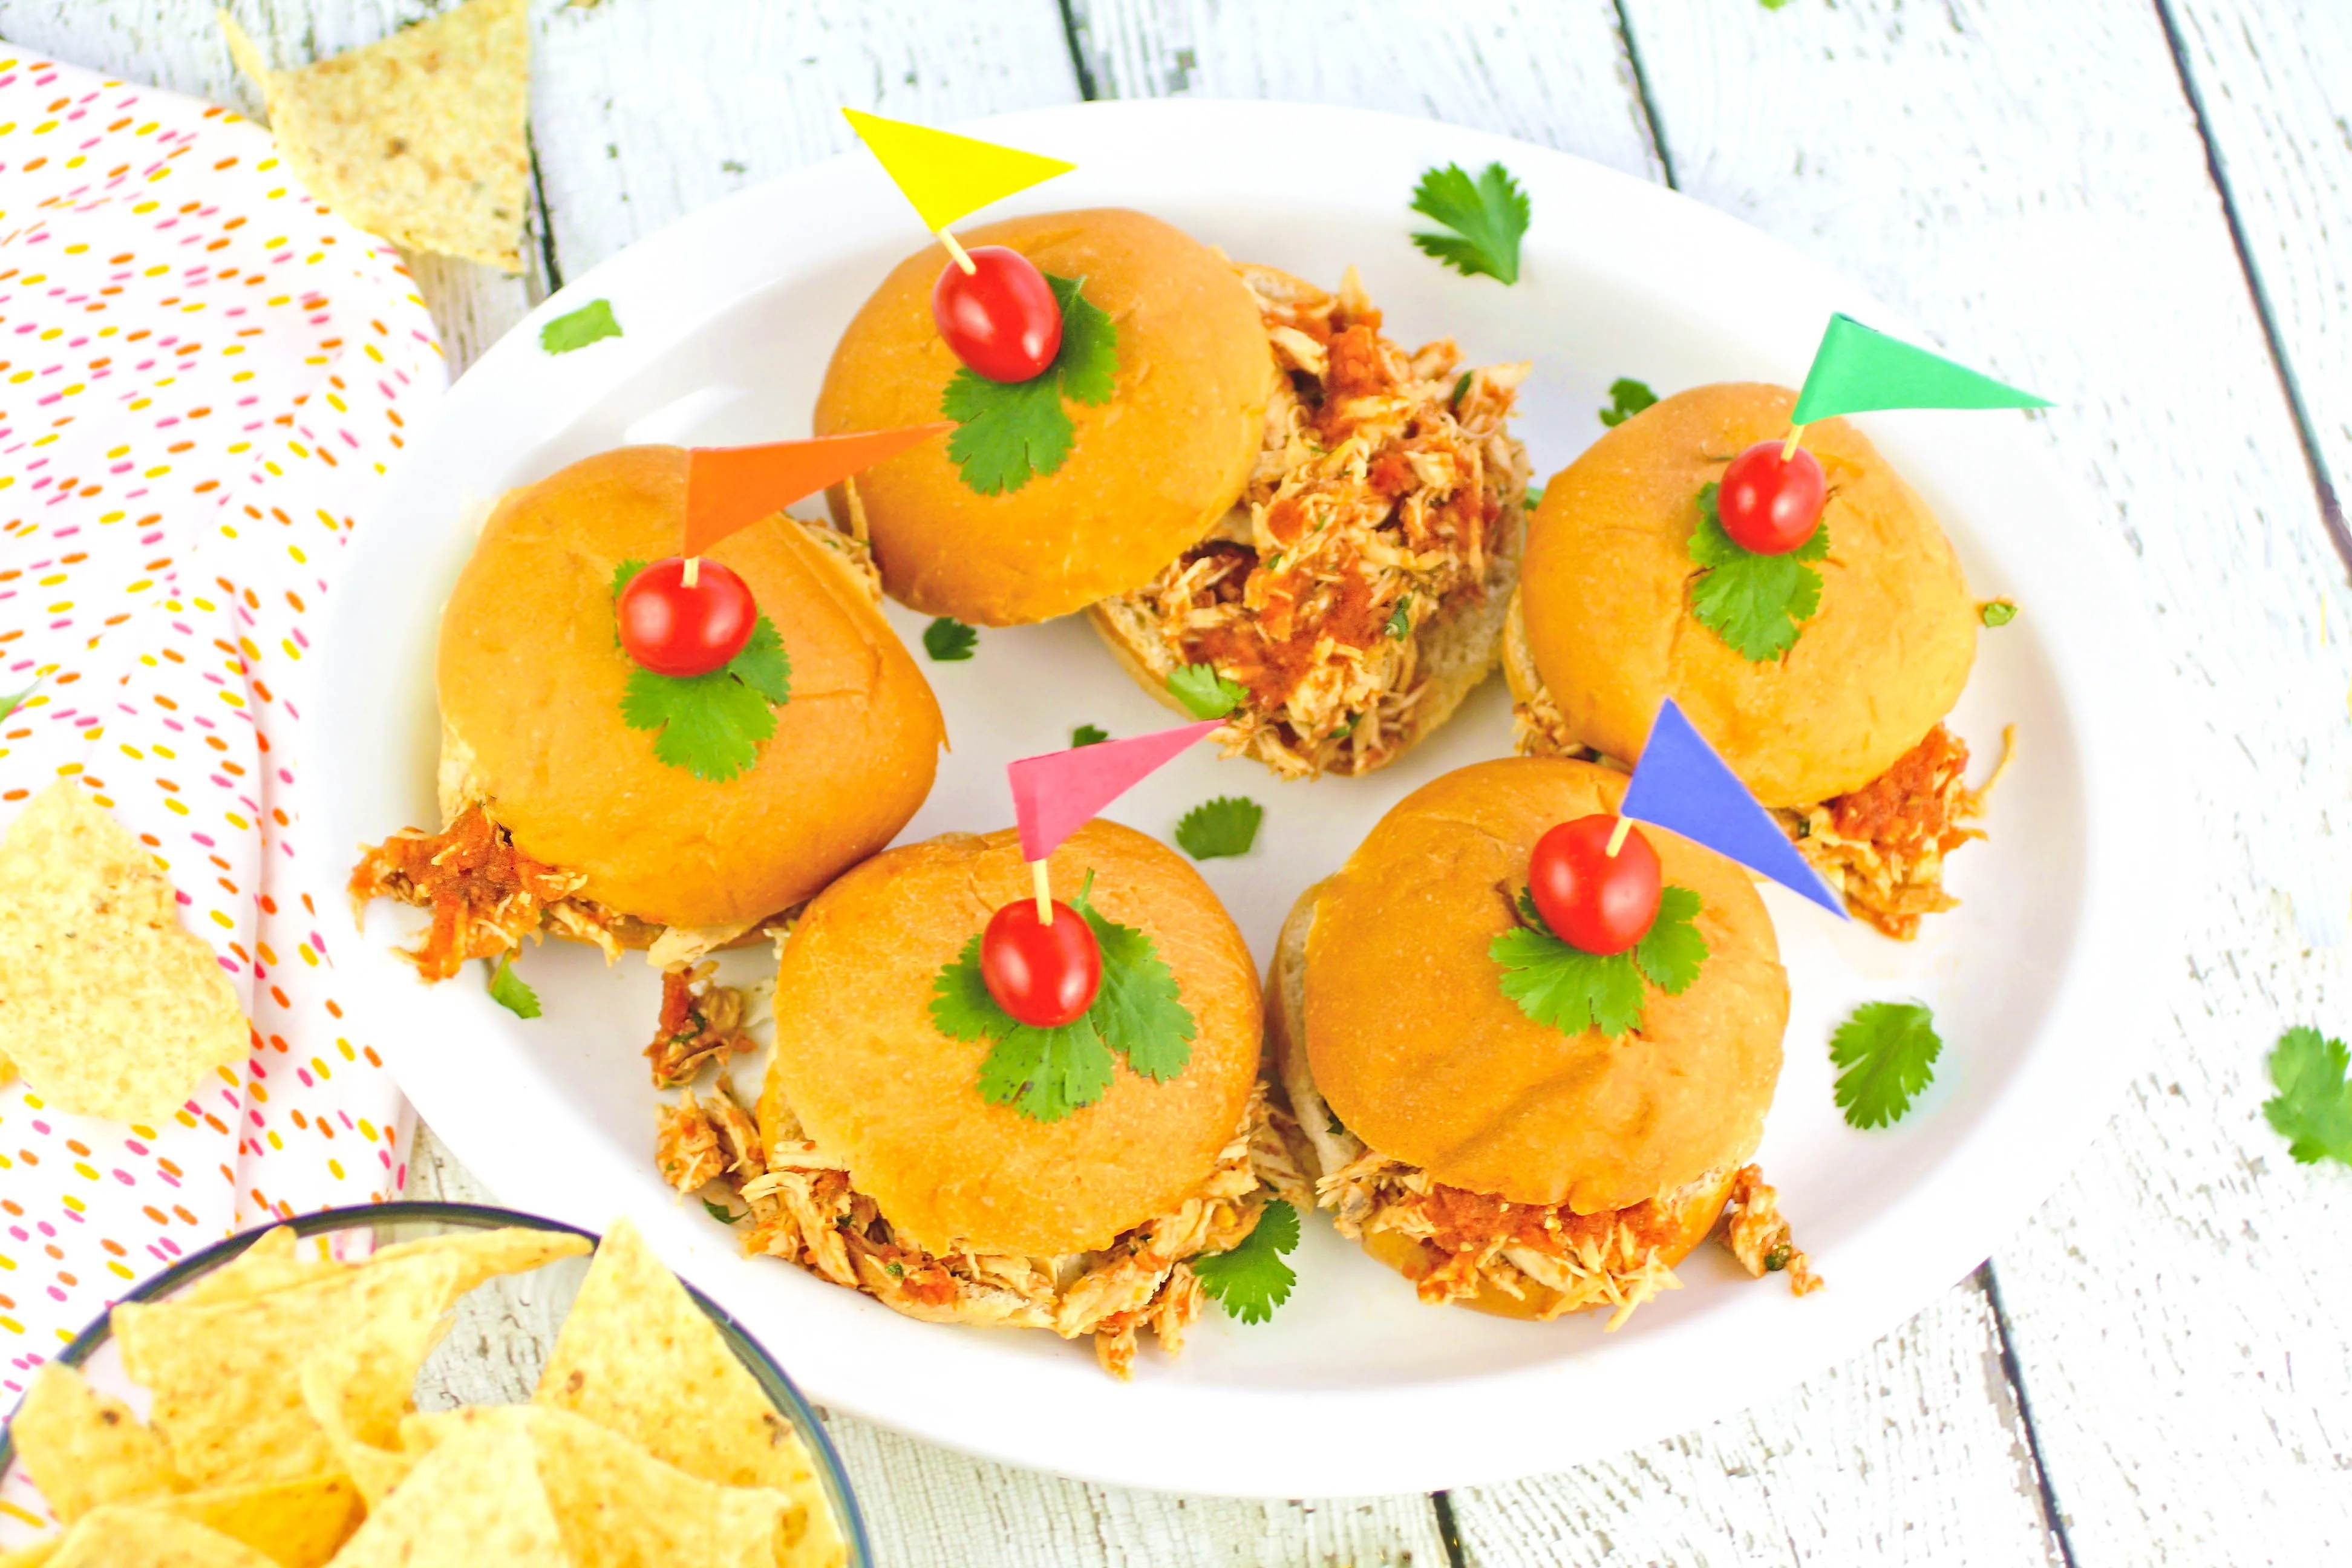 Slow Cooker Southwestern Pulled Chicken Sandwiches will feed a crowd! Slow Cooker Southwestern Pulled Chicken Sandwiches are perfect when you've got a crowd together.